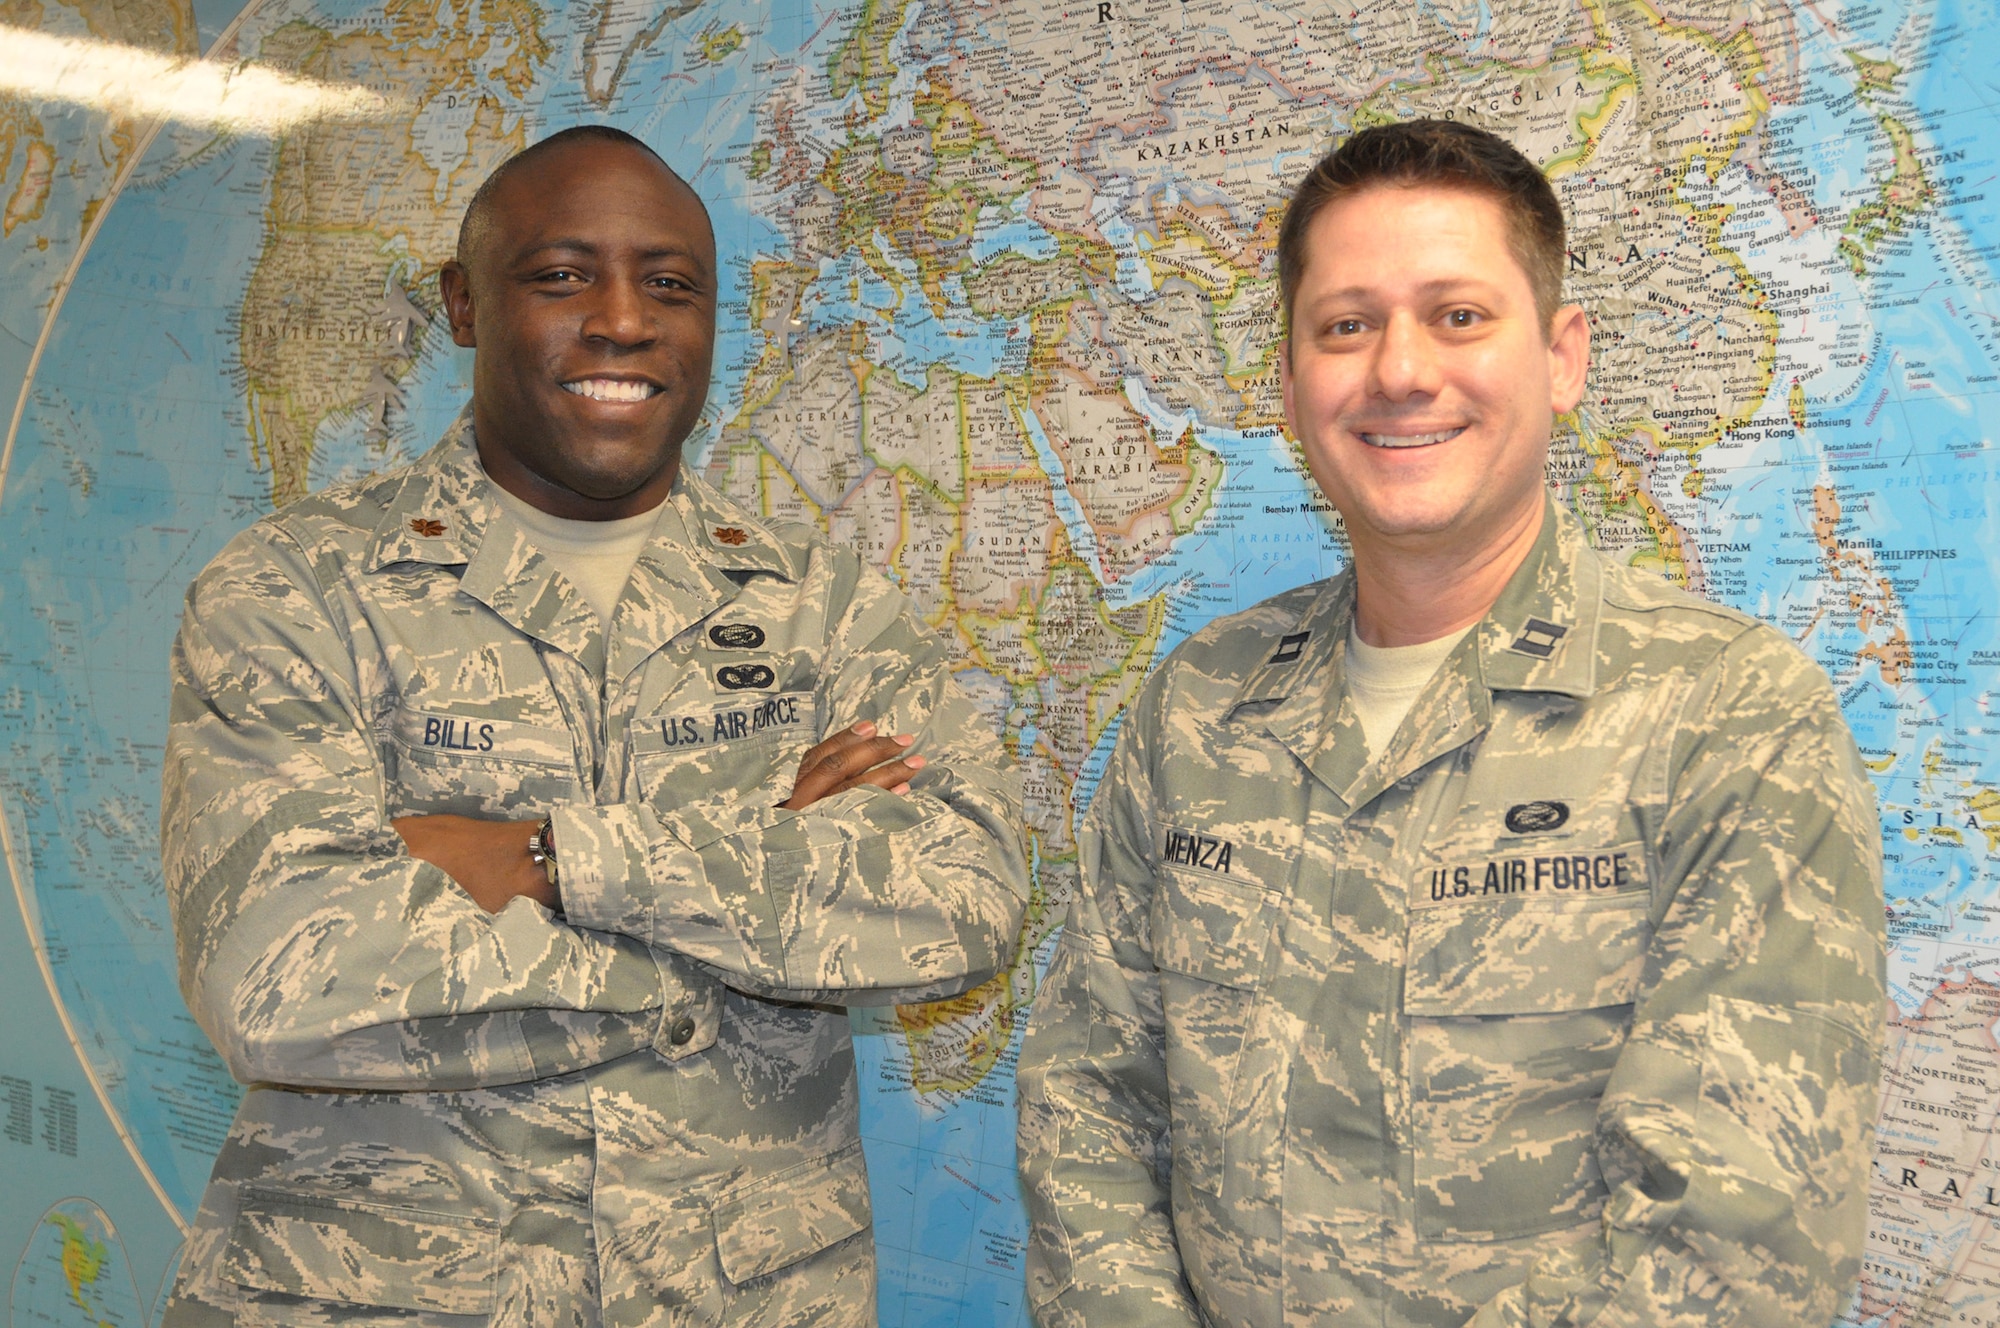 Maj. Audric Bills, 445th Equal Opportunity office director, and Capt. Nick Menza, EO officer, and their staff are here to serve 445th Airlift Wing Airmen needing their services. The office is open during the Scarlet unit training assembly from 8:30 a.m. to 4 p.m. or by appointment on the Gray UTA. Airmen may call (937) 257-0237 or send an e-mail to 445aw.me@us.af.mil to set up an appointment. (U.S. Air Force photo/Staff Sgt. Rachel Ingram)